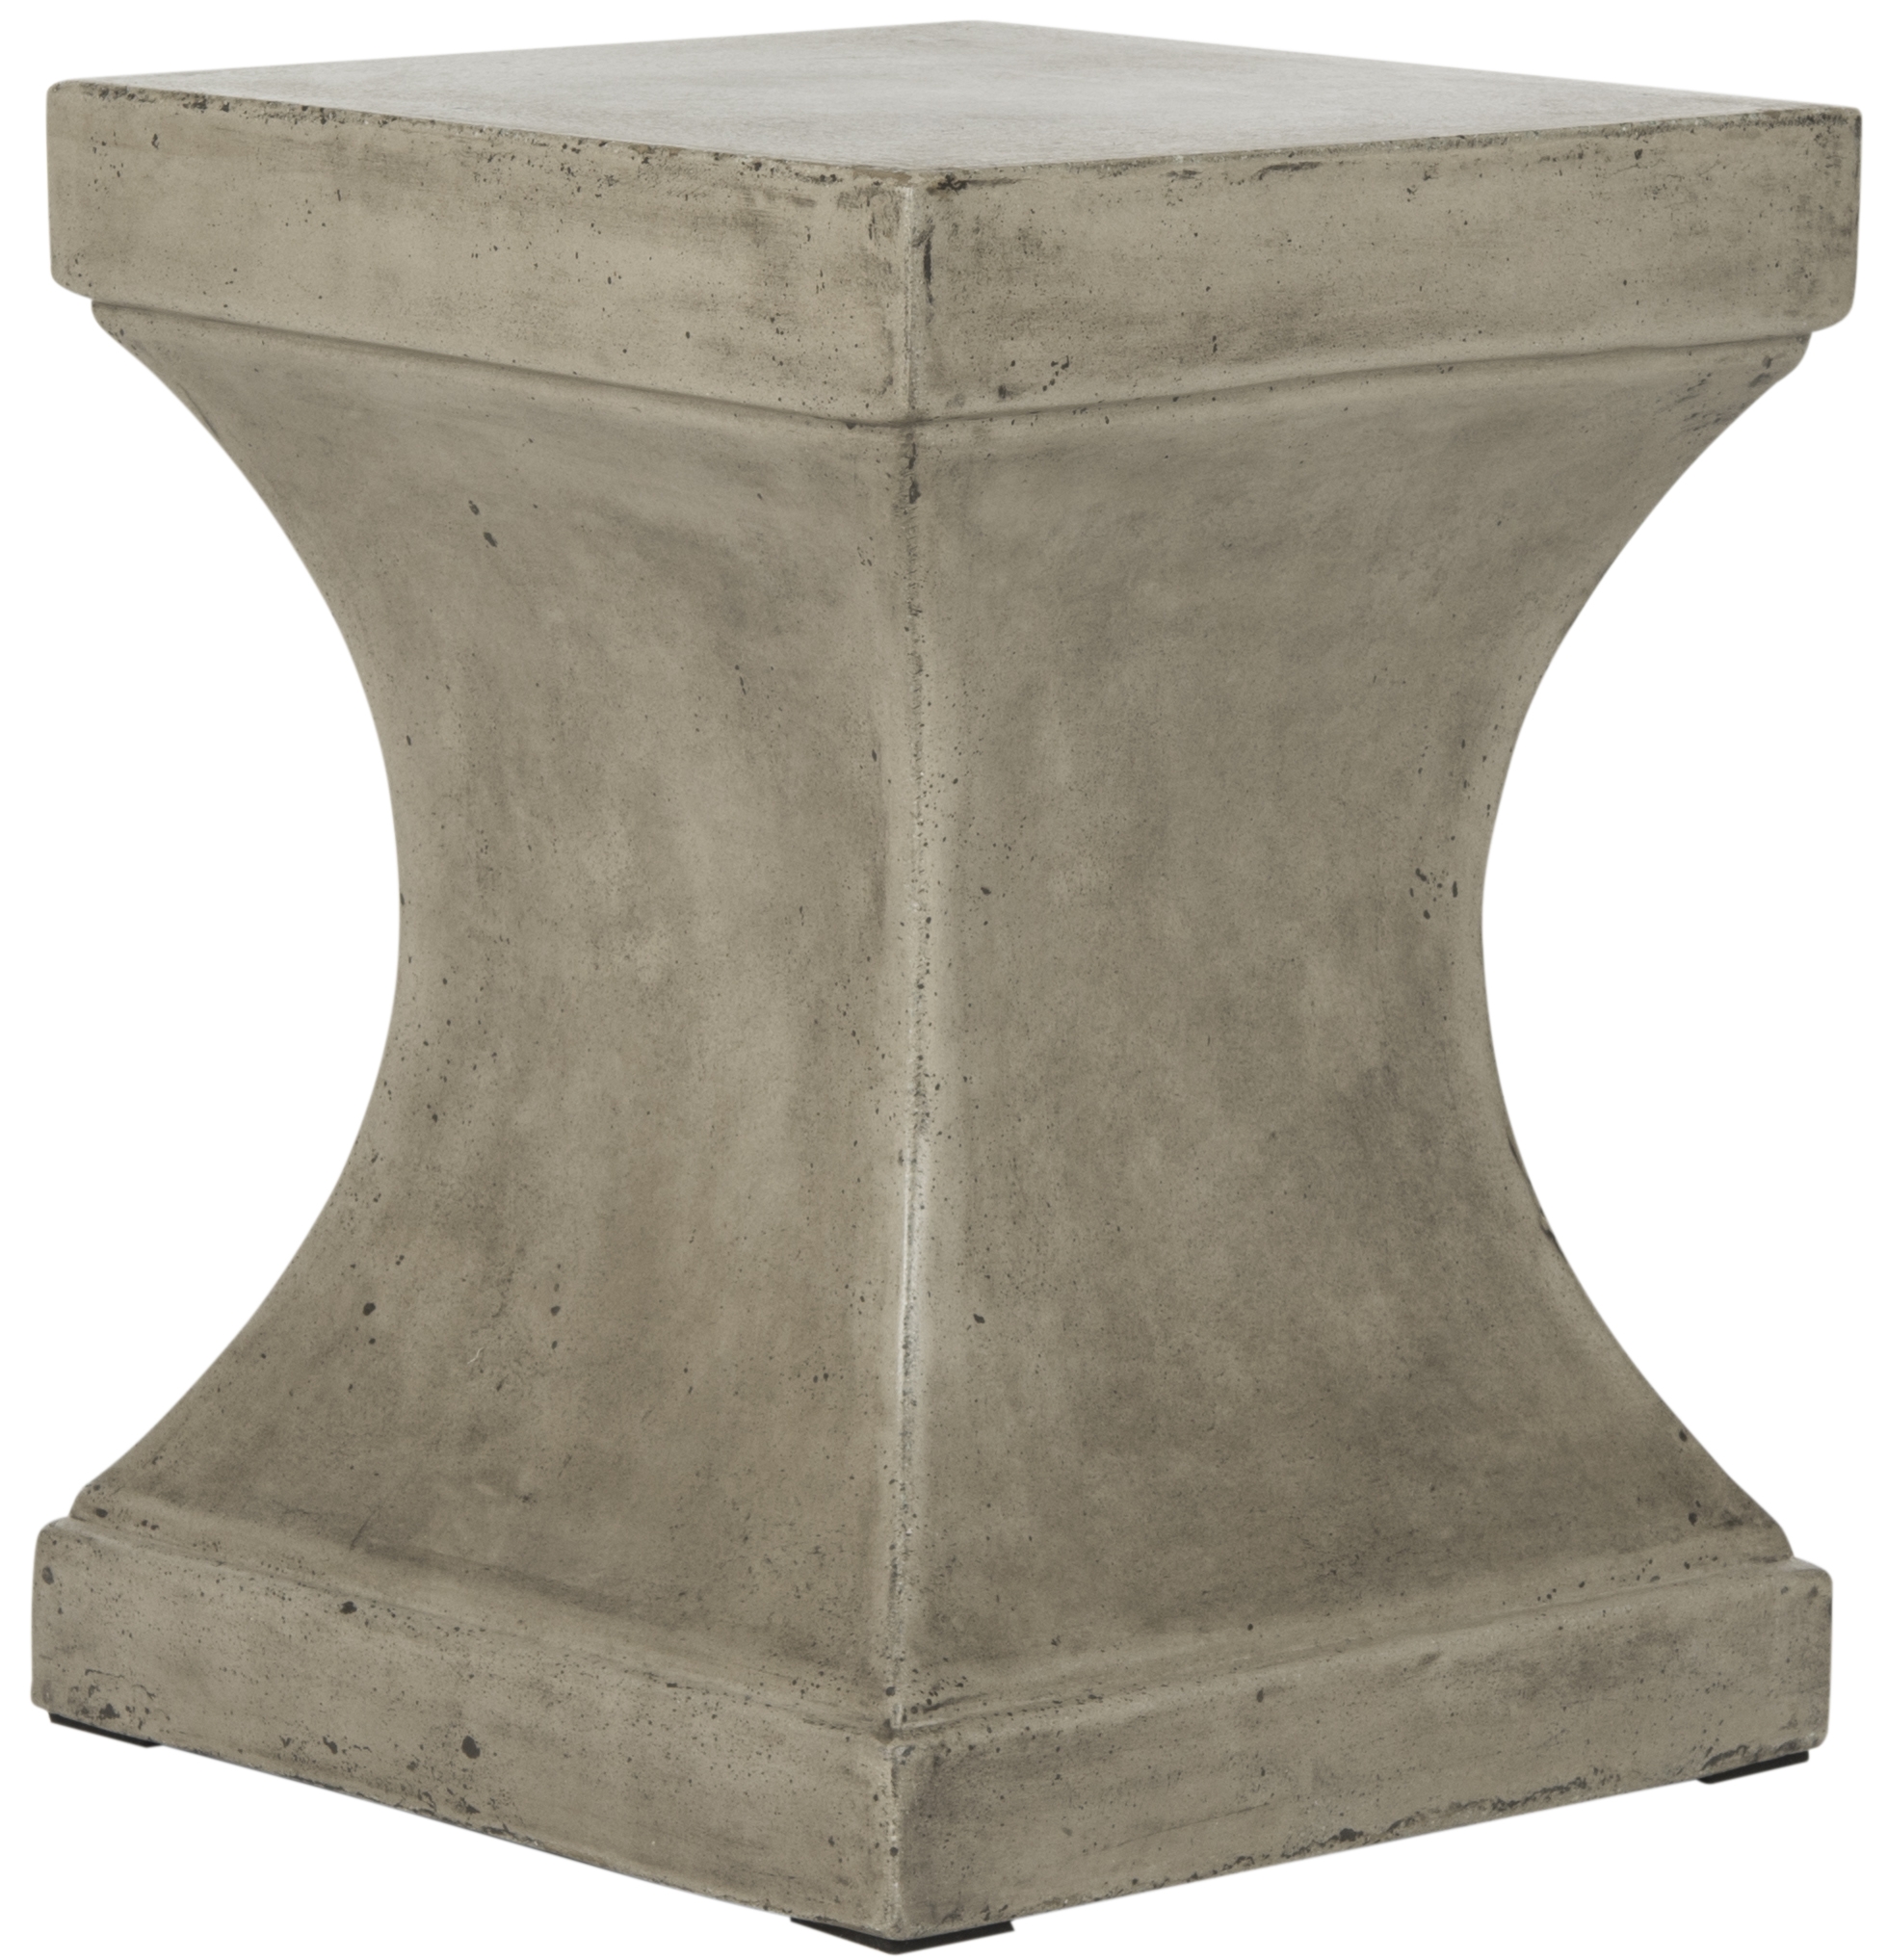 Curby Indoor/Outdoor Modern Concrete 17.7-Inch H Accent Table - Dark Grey - Arlo Home - Image 1